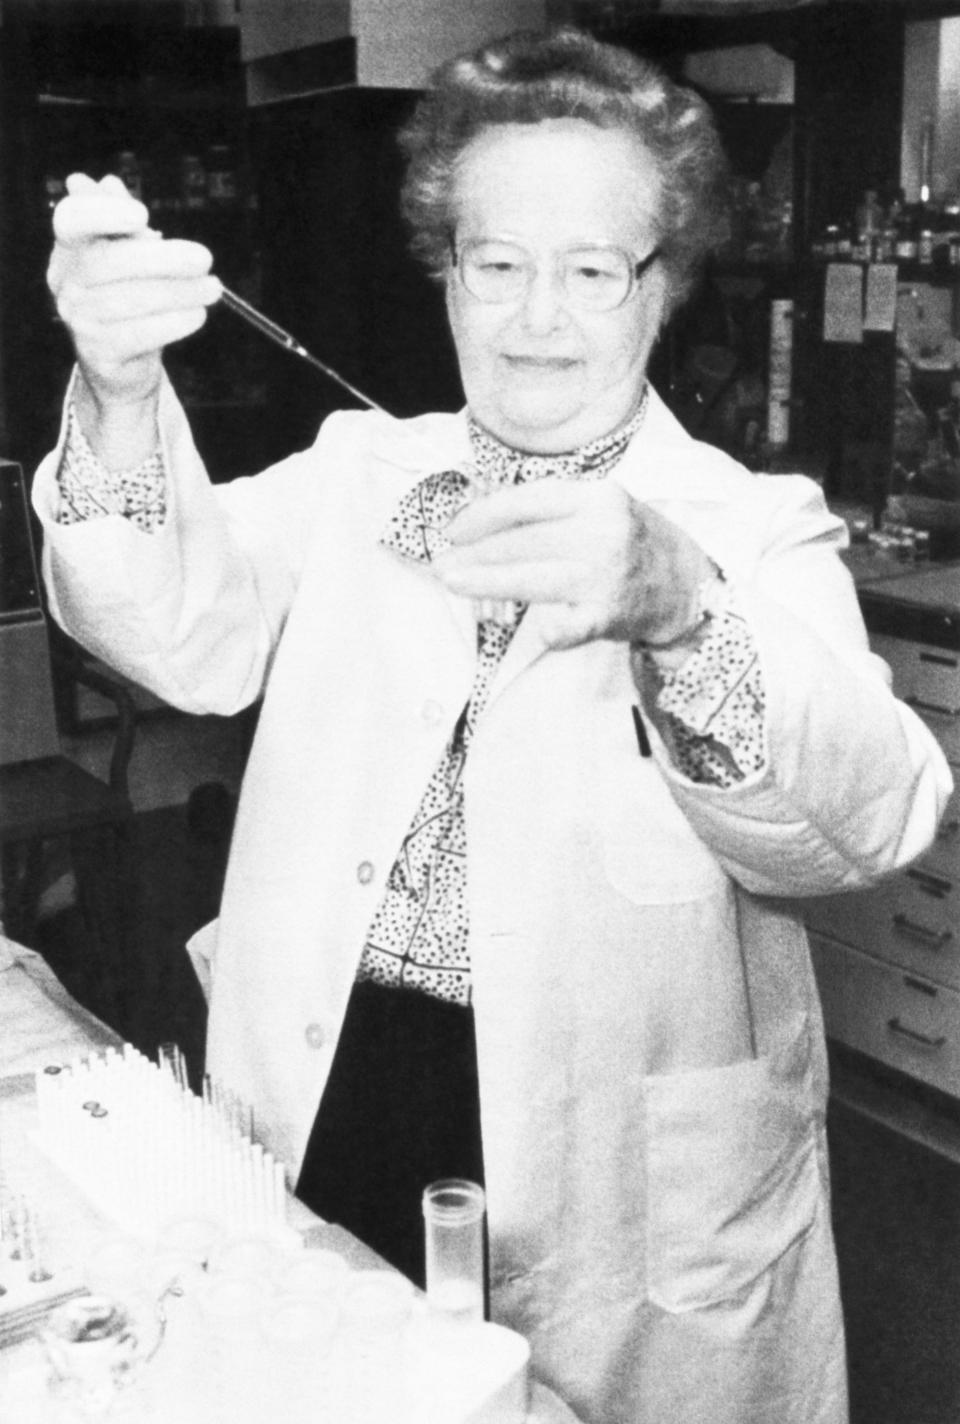 American biochemist <a href="http://www.nobelprize.org/nobel_prizes/medicine/laureates/1988/elion-facts.html" target="_blank">Gertrude Elion</a> changed the lives of millions when, in the mid 80s, she developed several vital new drugs and treatments, including the first&nbsp;immunosuppressive drug used for organ transplants. Elion not only devised radical new treatments for leukemia, her work also laid the foundation for the development of AZT, the life-saving AIDS medication.